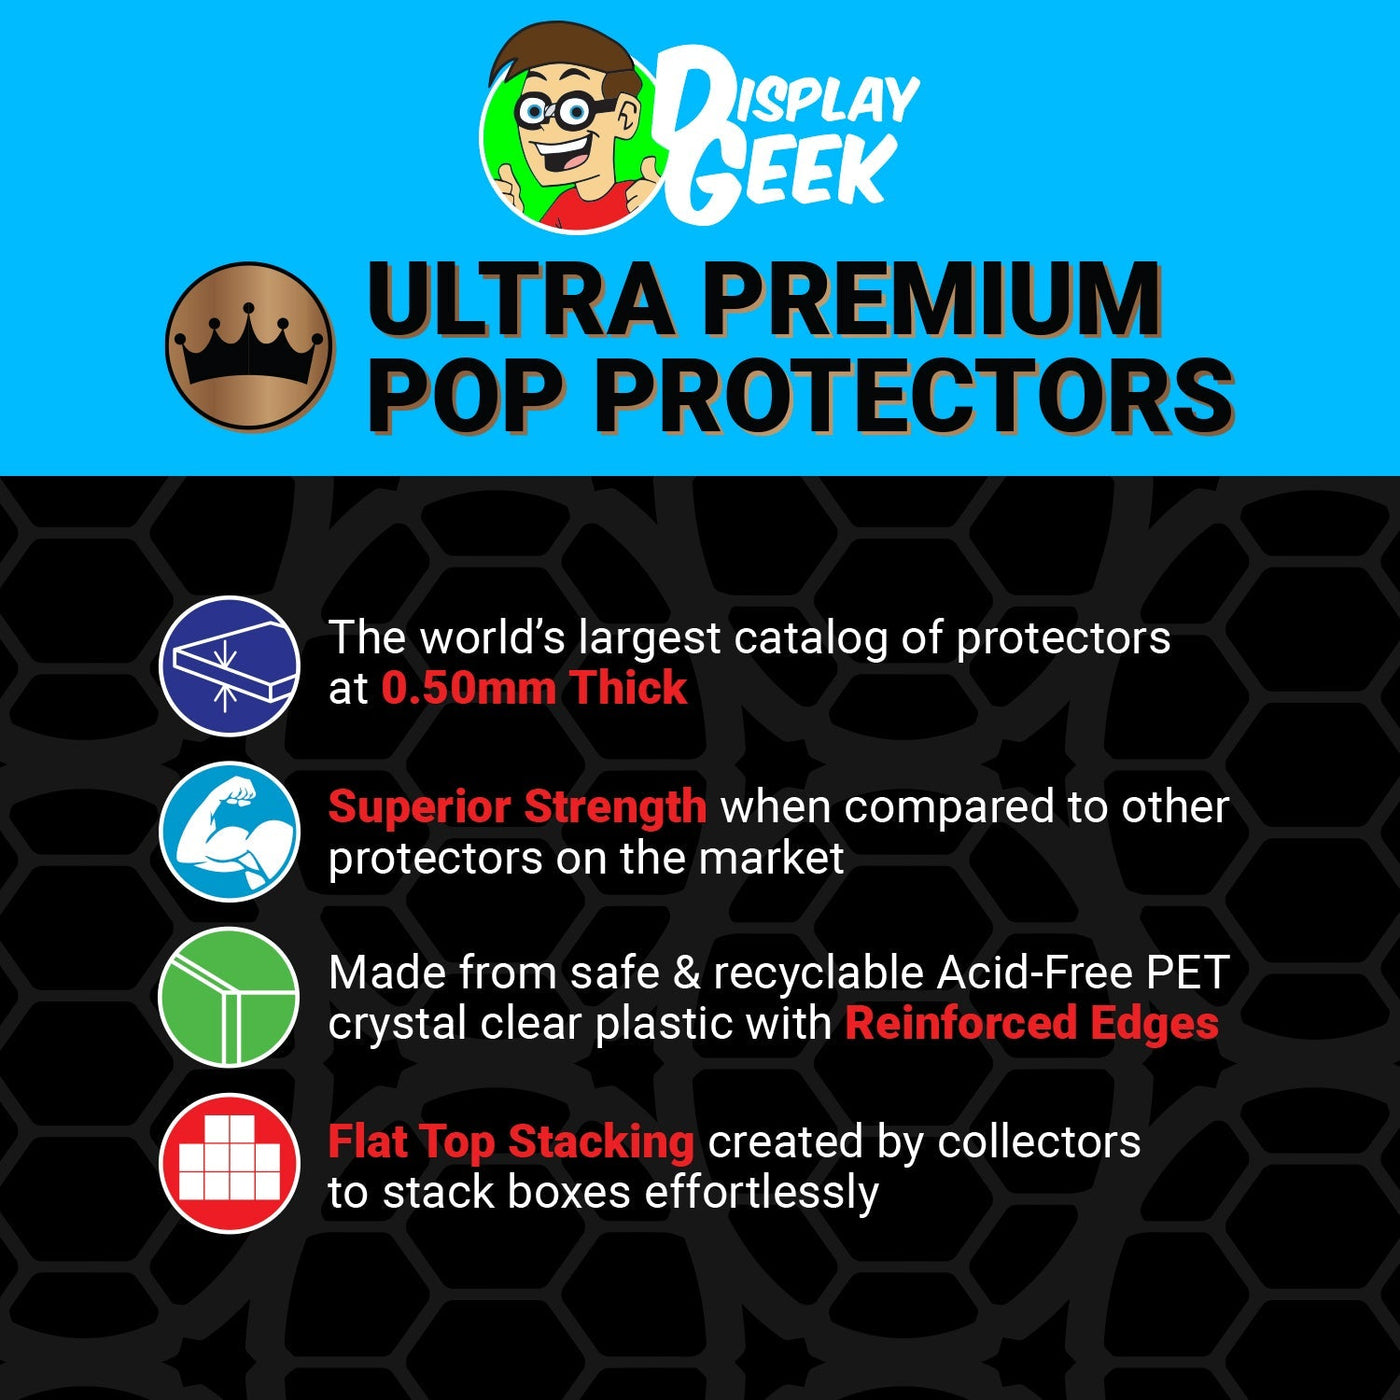 Pop Protector for 9 inch Giant Maleficent Funko Pop on The Protector Guide App by Display Geek